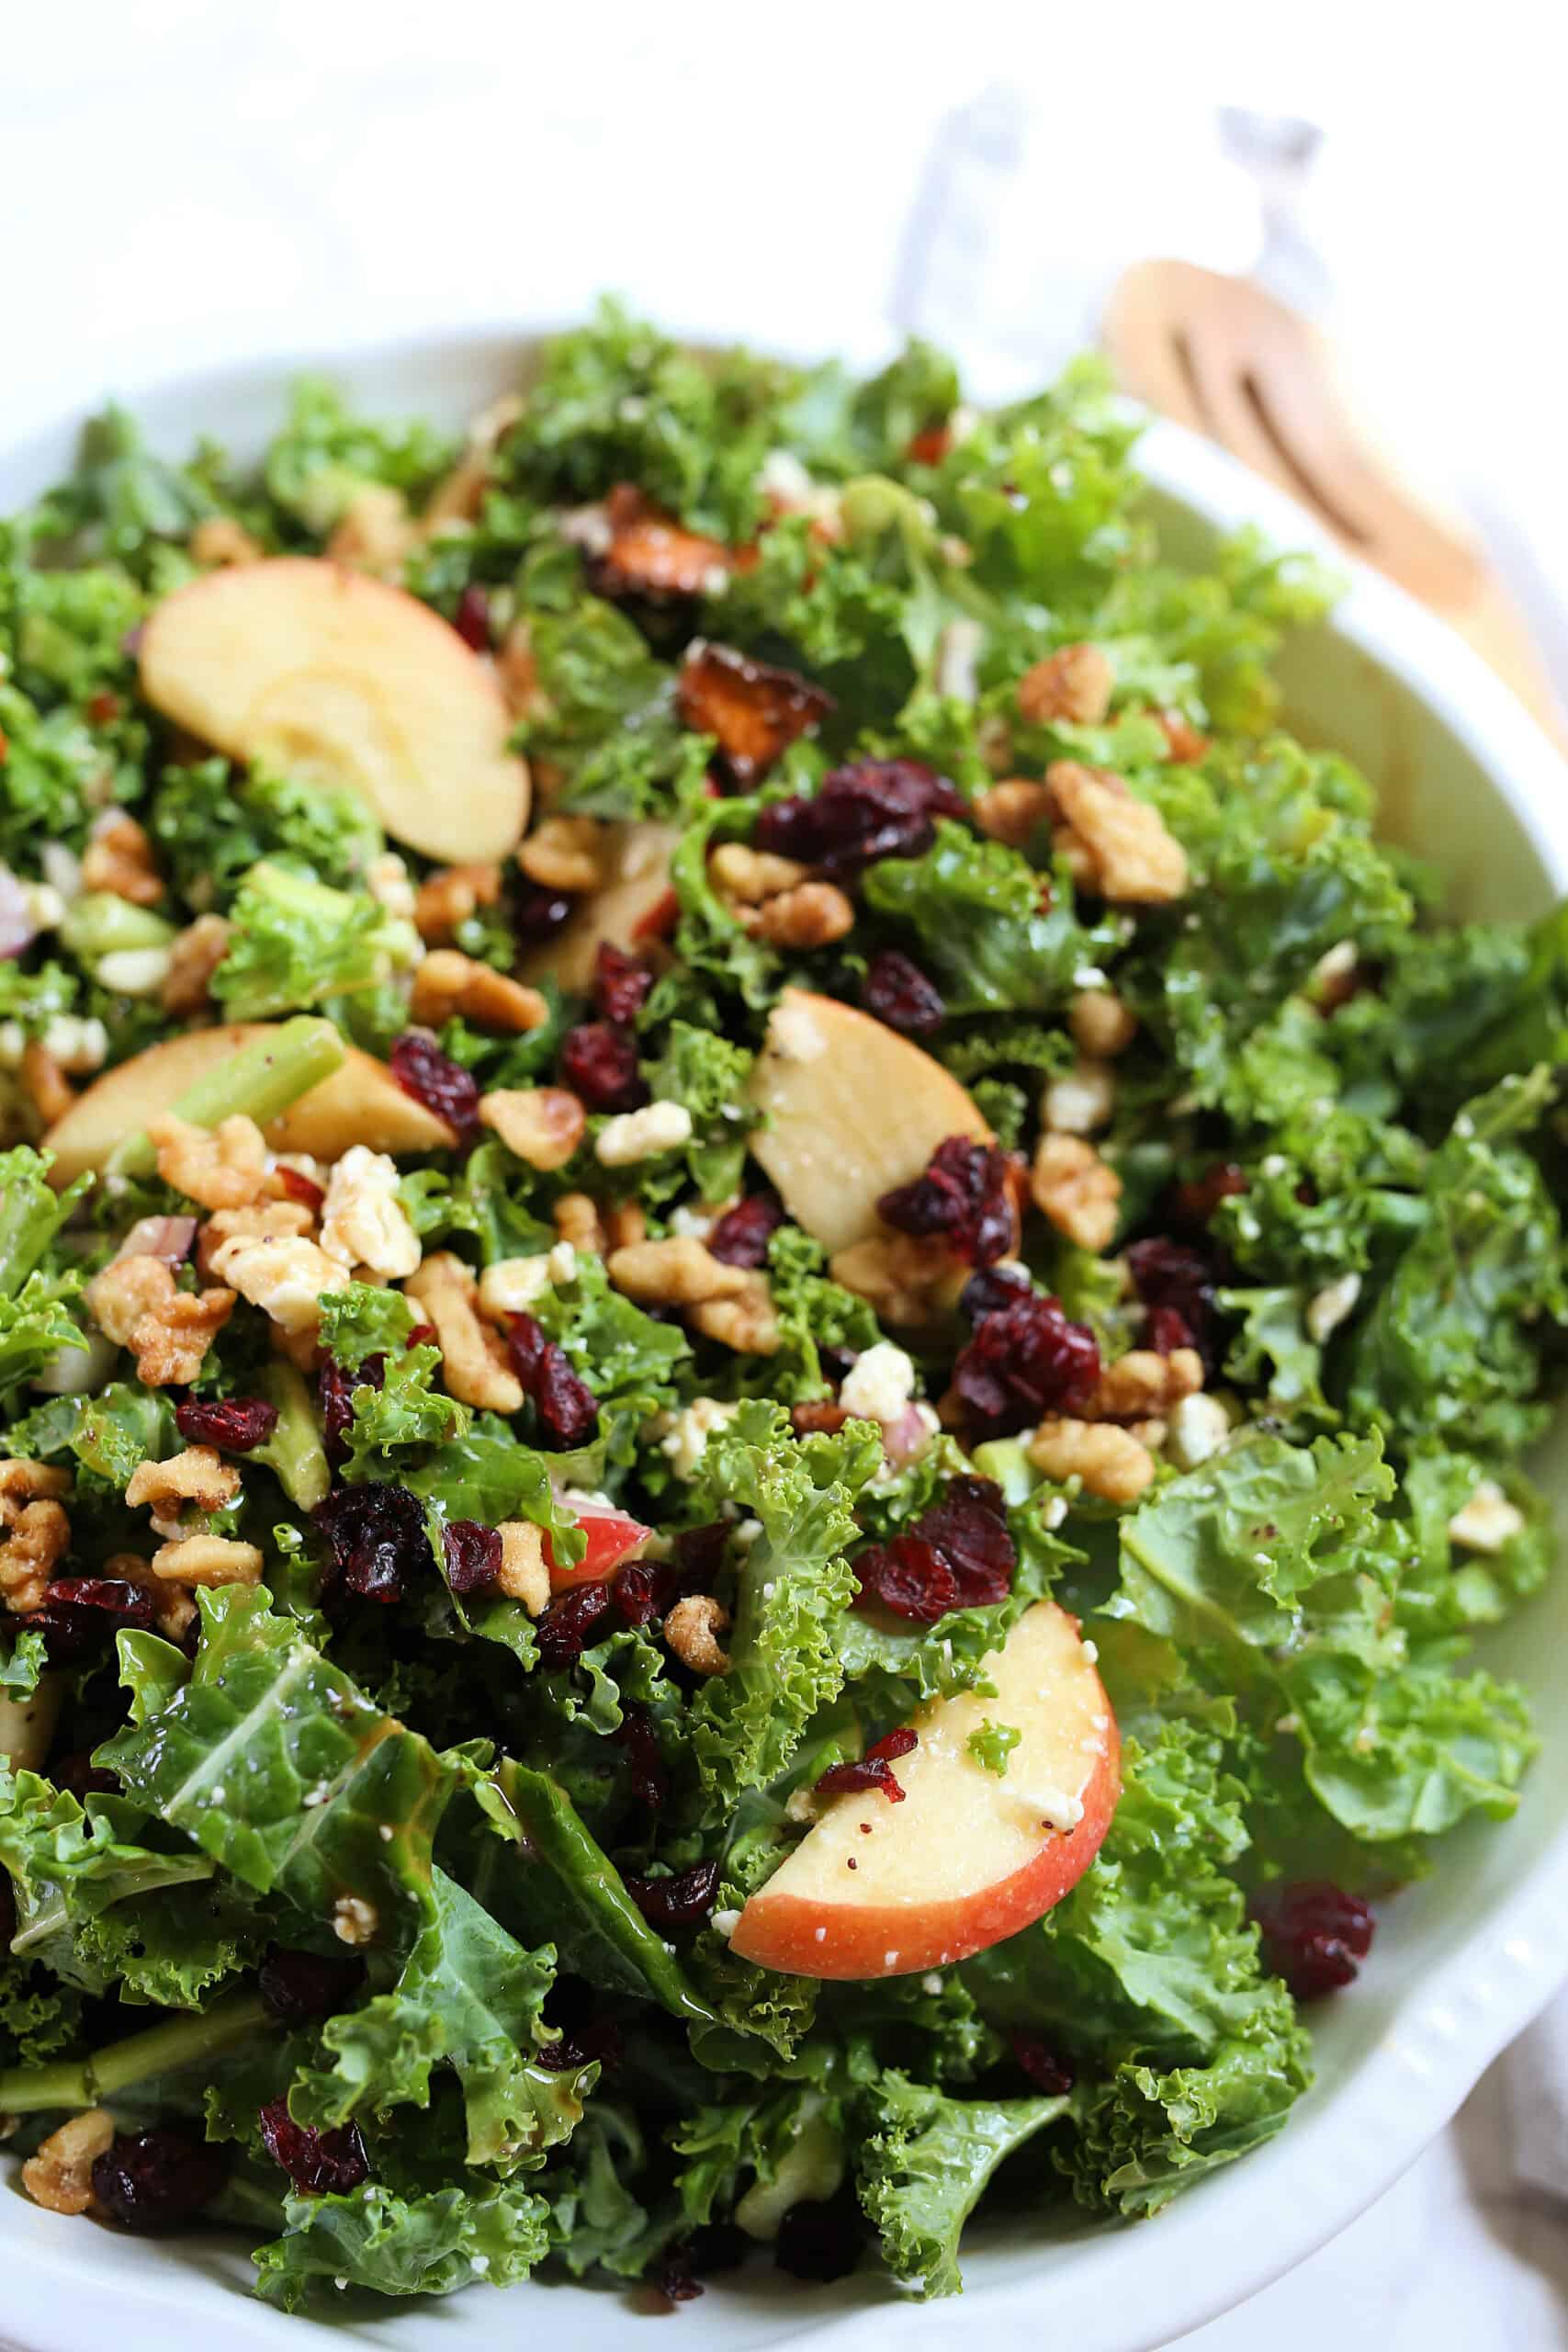 Salad with kale and apple.